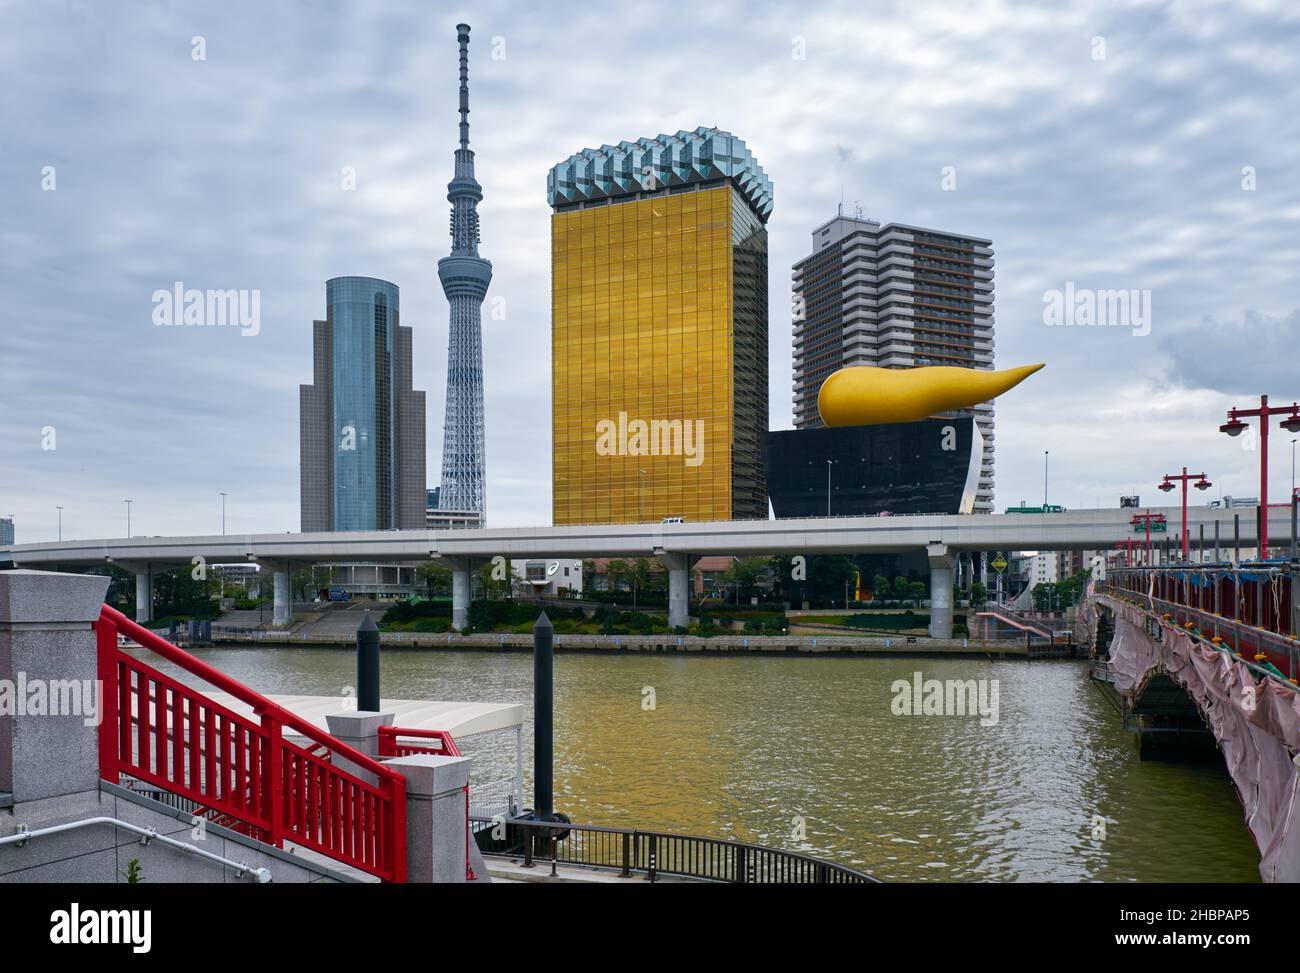 Tokyo, Japan - October 24, 2019 Asahi Beer Hall and Asahi Flame of Asahi Breweries headquarters, the most recognizable modern structures of Tokyo, loc Stock Photo